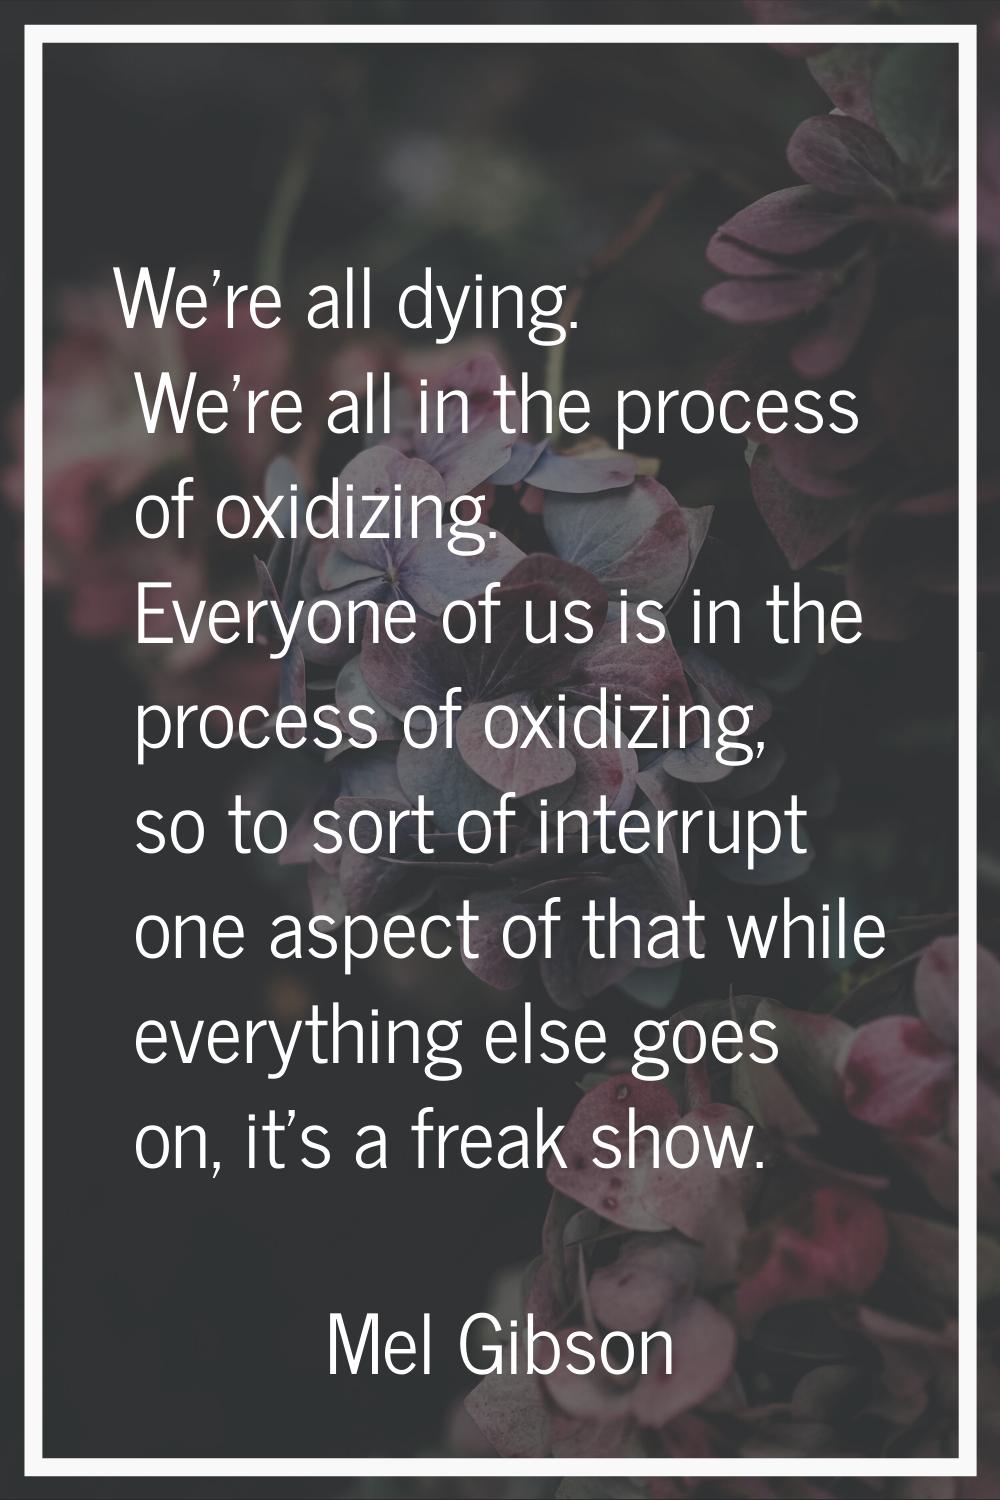 We're all dying. We're all in the process of oxidizing. Everyone of us is in the process of oxidizi